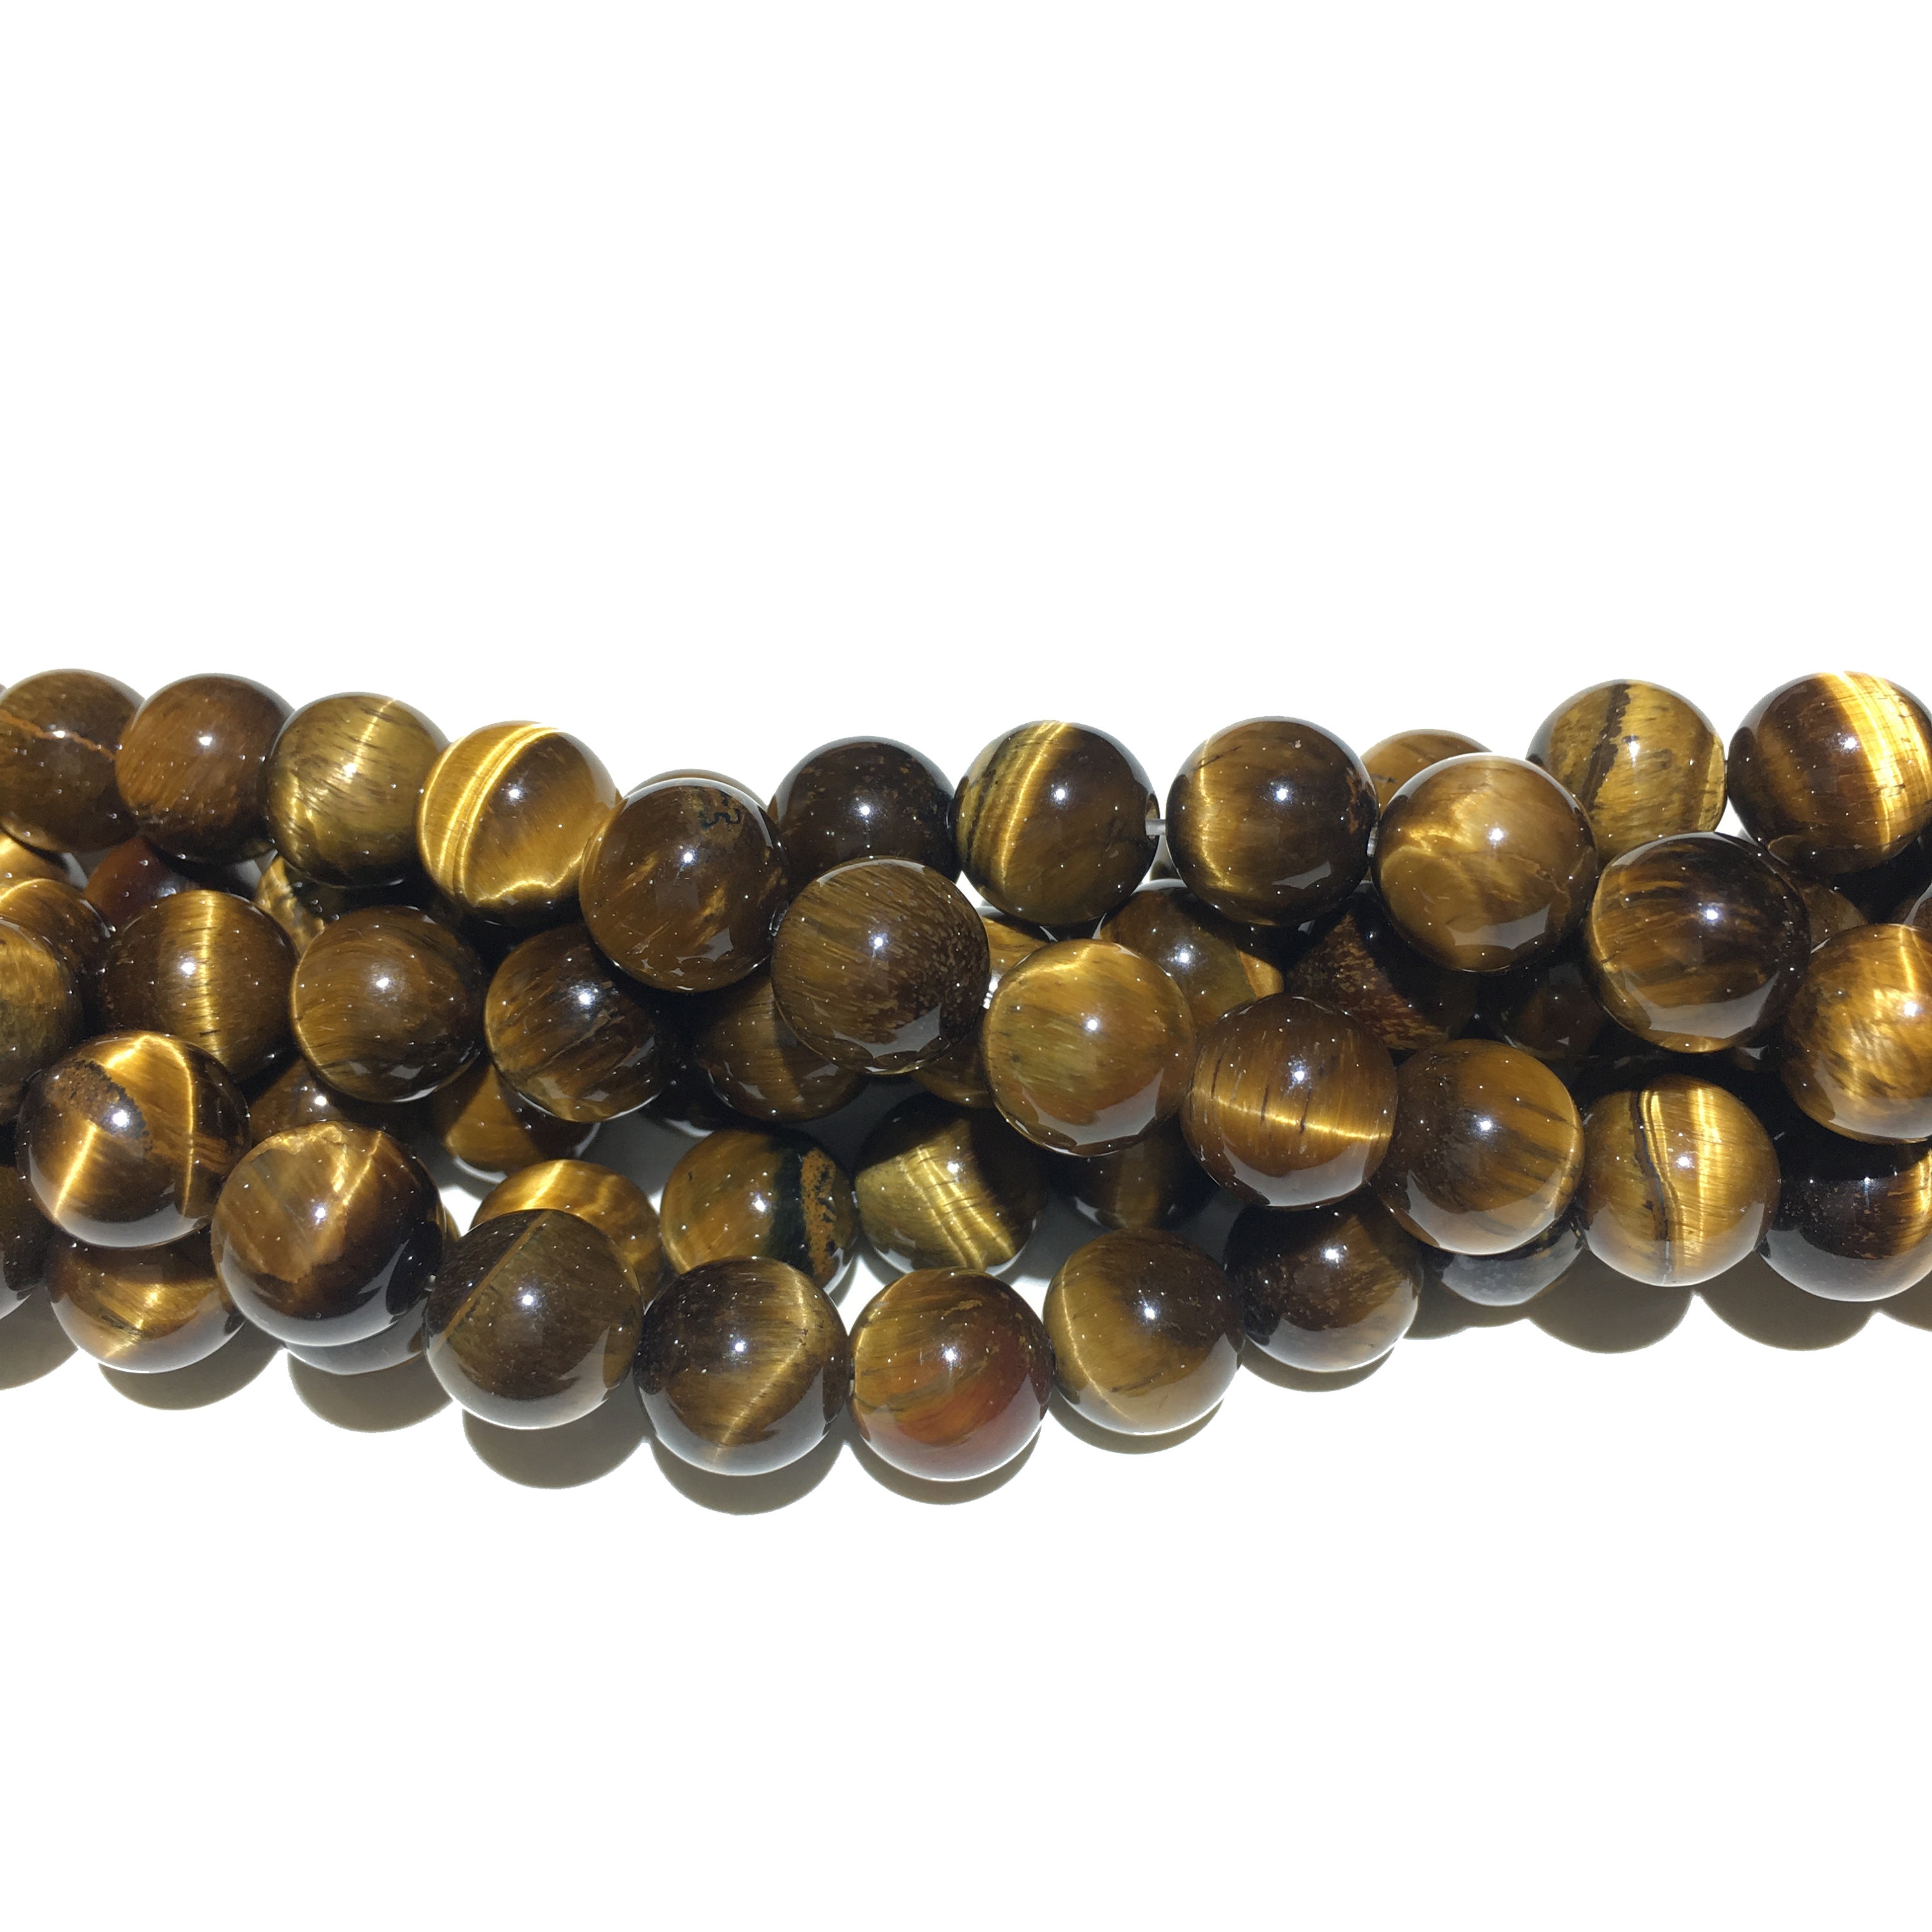 Natural AAA Grade Dream Lace Blue Tiger's Eye Gold Beads For Jewelry Making  15